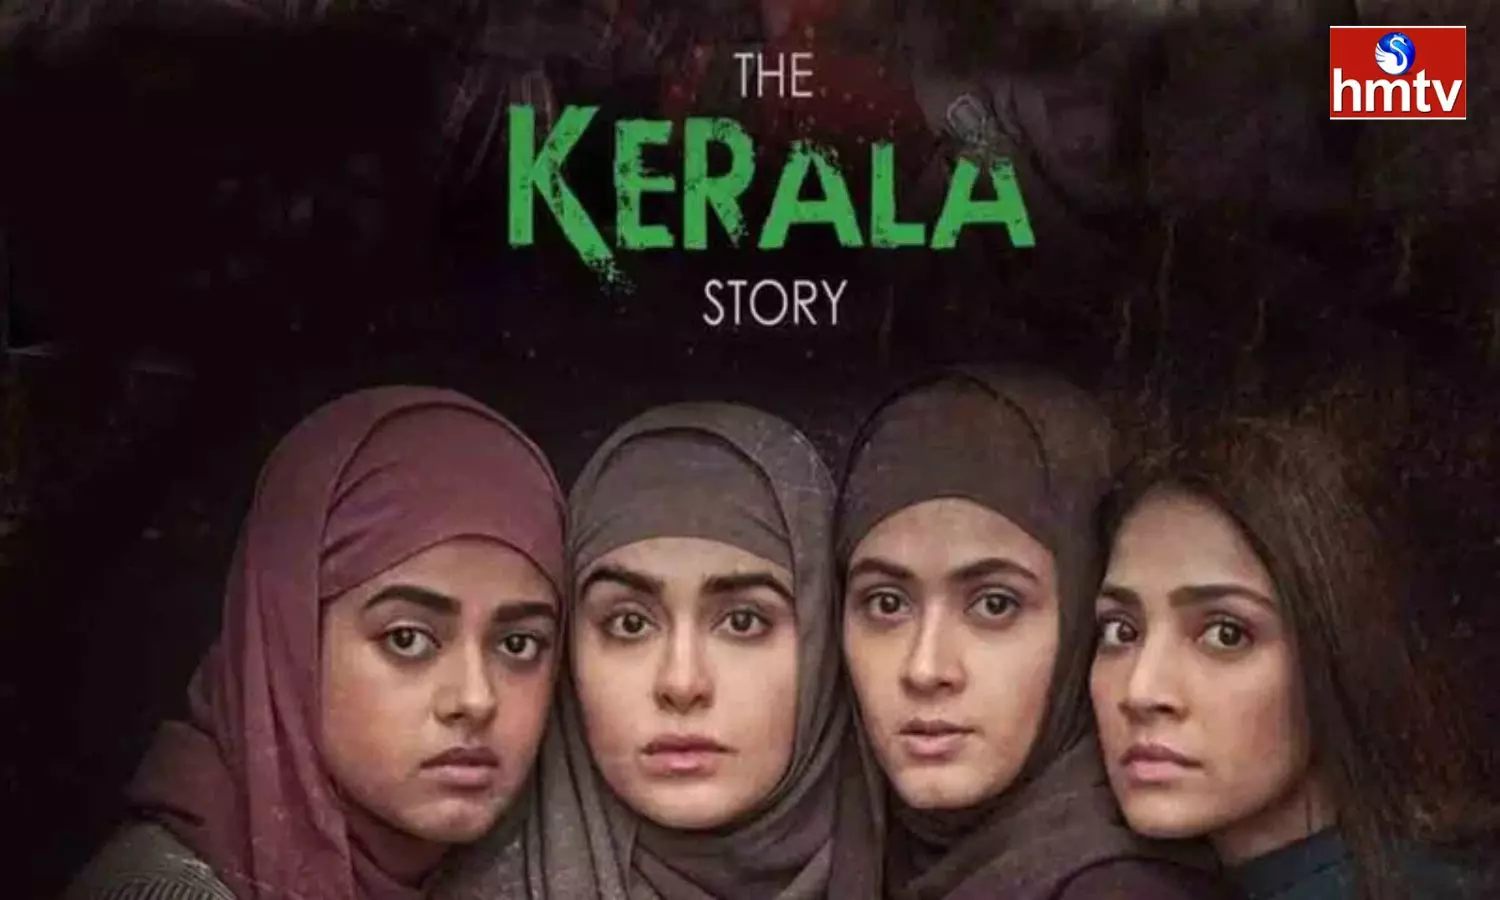 Hearing on The Kerala Story in the Supreme Court today